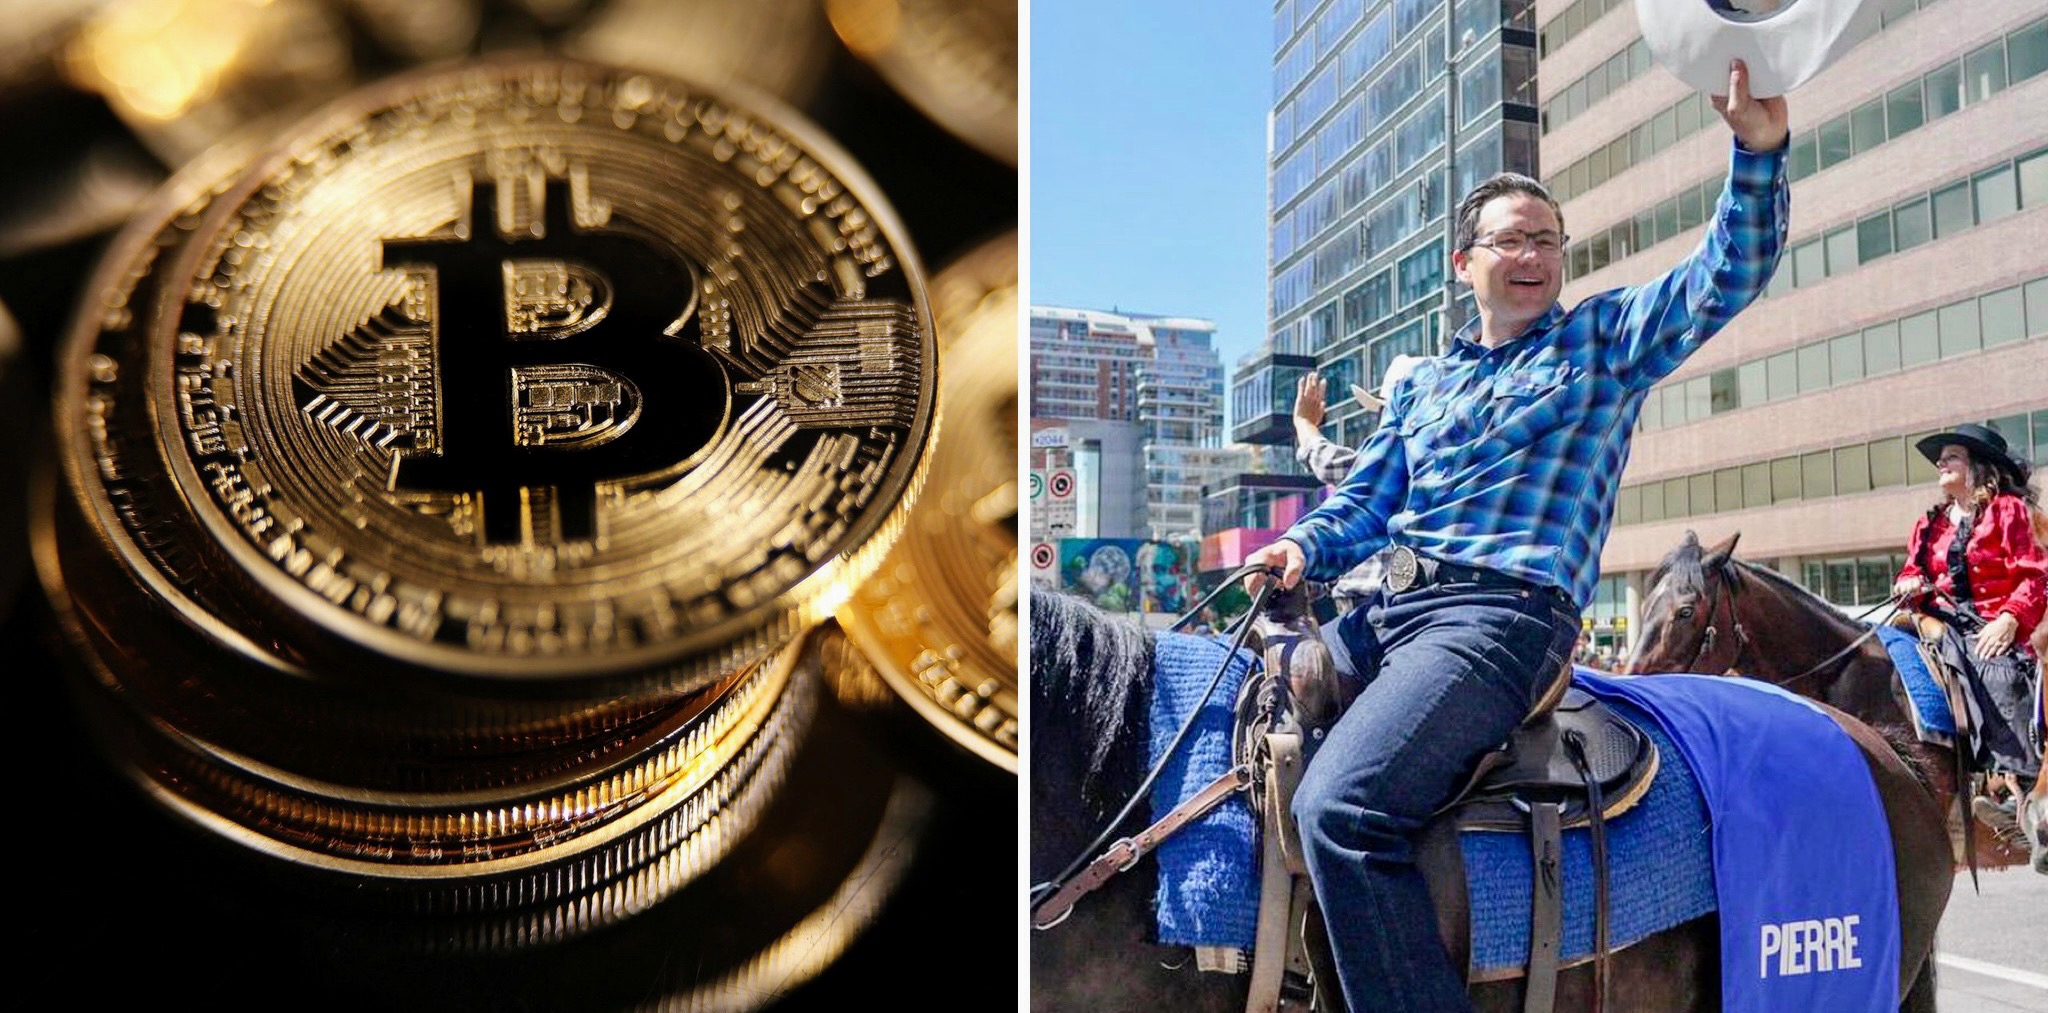 “If Canadians had listened to Pierre Poilievre on Bitcoin, they would have lost half their savings”